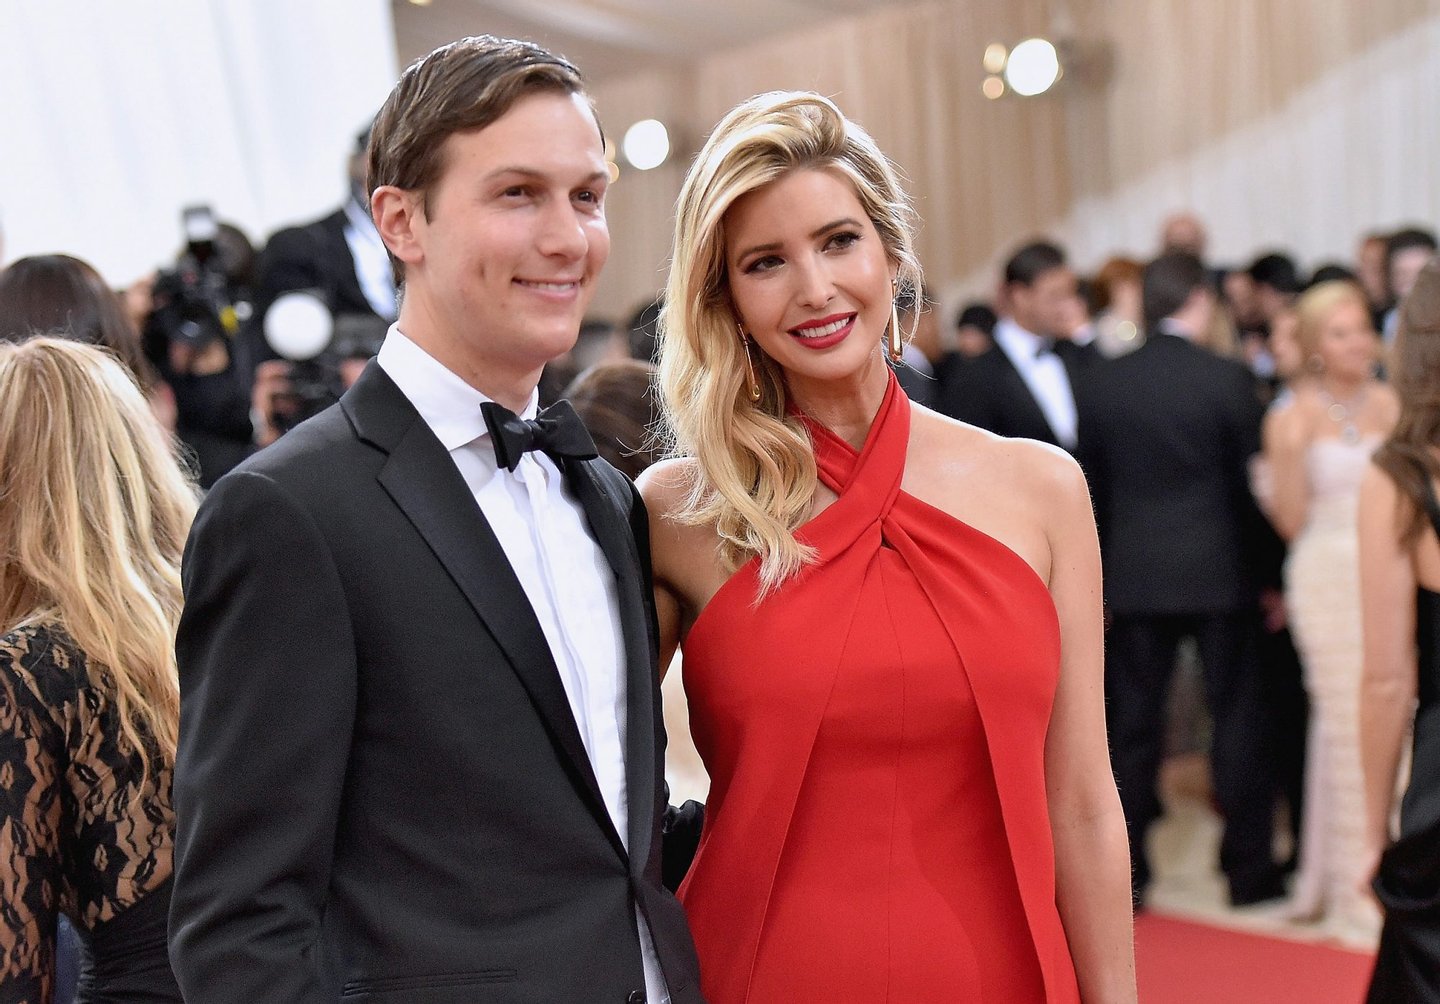 NEW YORK, NY - MAY 02: Jared Kushner and wife Ivanka Trump attend the "Manus x Machina: Fashion In An Age Of Technology" Costume Institute Gala at Metropolitan Museum of Art on May 2, 2016 in New York City. (Photo by Mike Coppola/Getty Images for People.com)